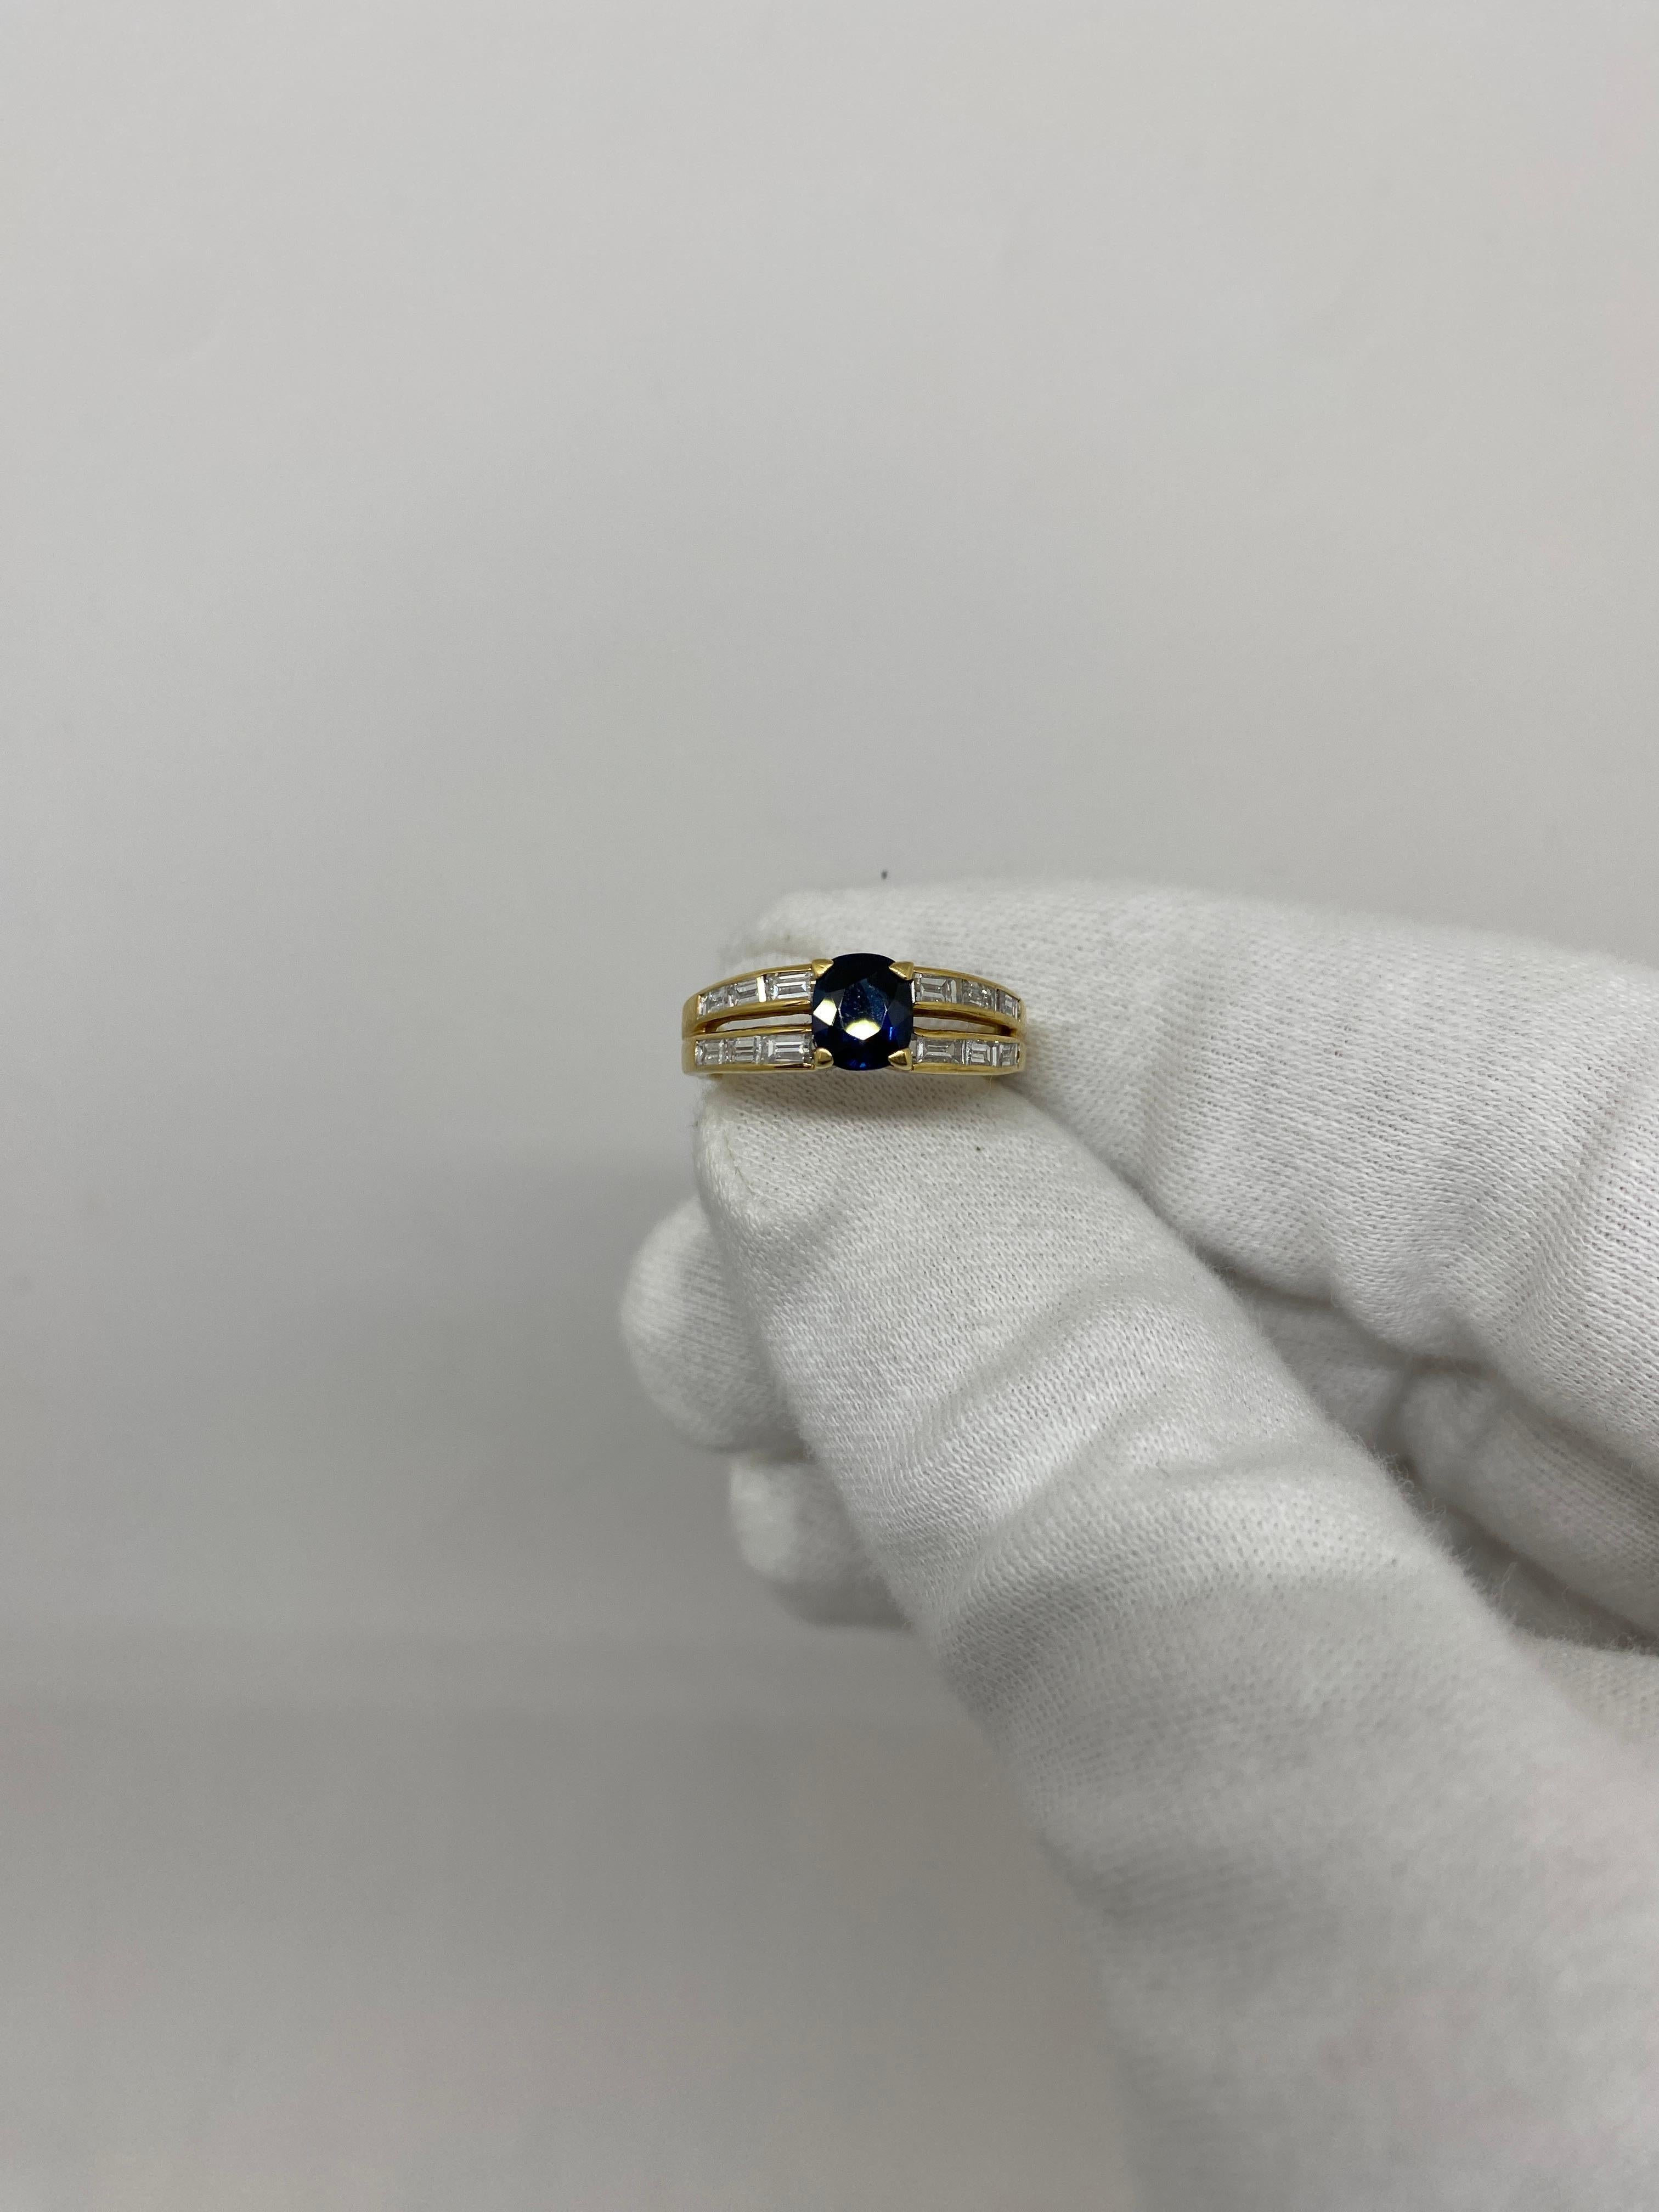 Ring made of 18kt yellow gold with oval blue sapphire for ct .0.90 and baguette-cut white diamonds for ct .0.80

Welcome to our jewelry collection, where every piece tells a story of timeless elegance and unparalleled craftsmanship. As a family-run